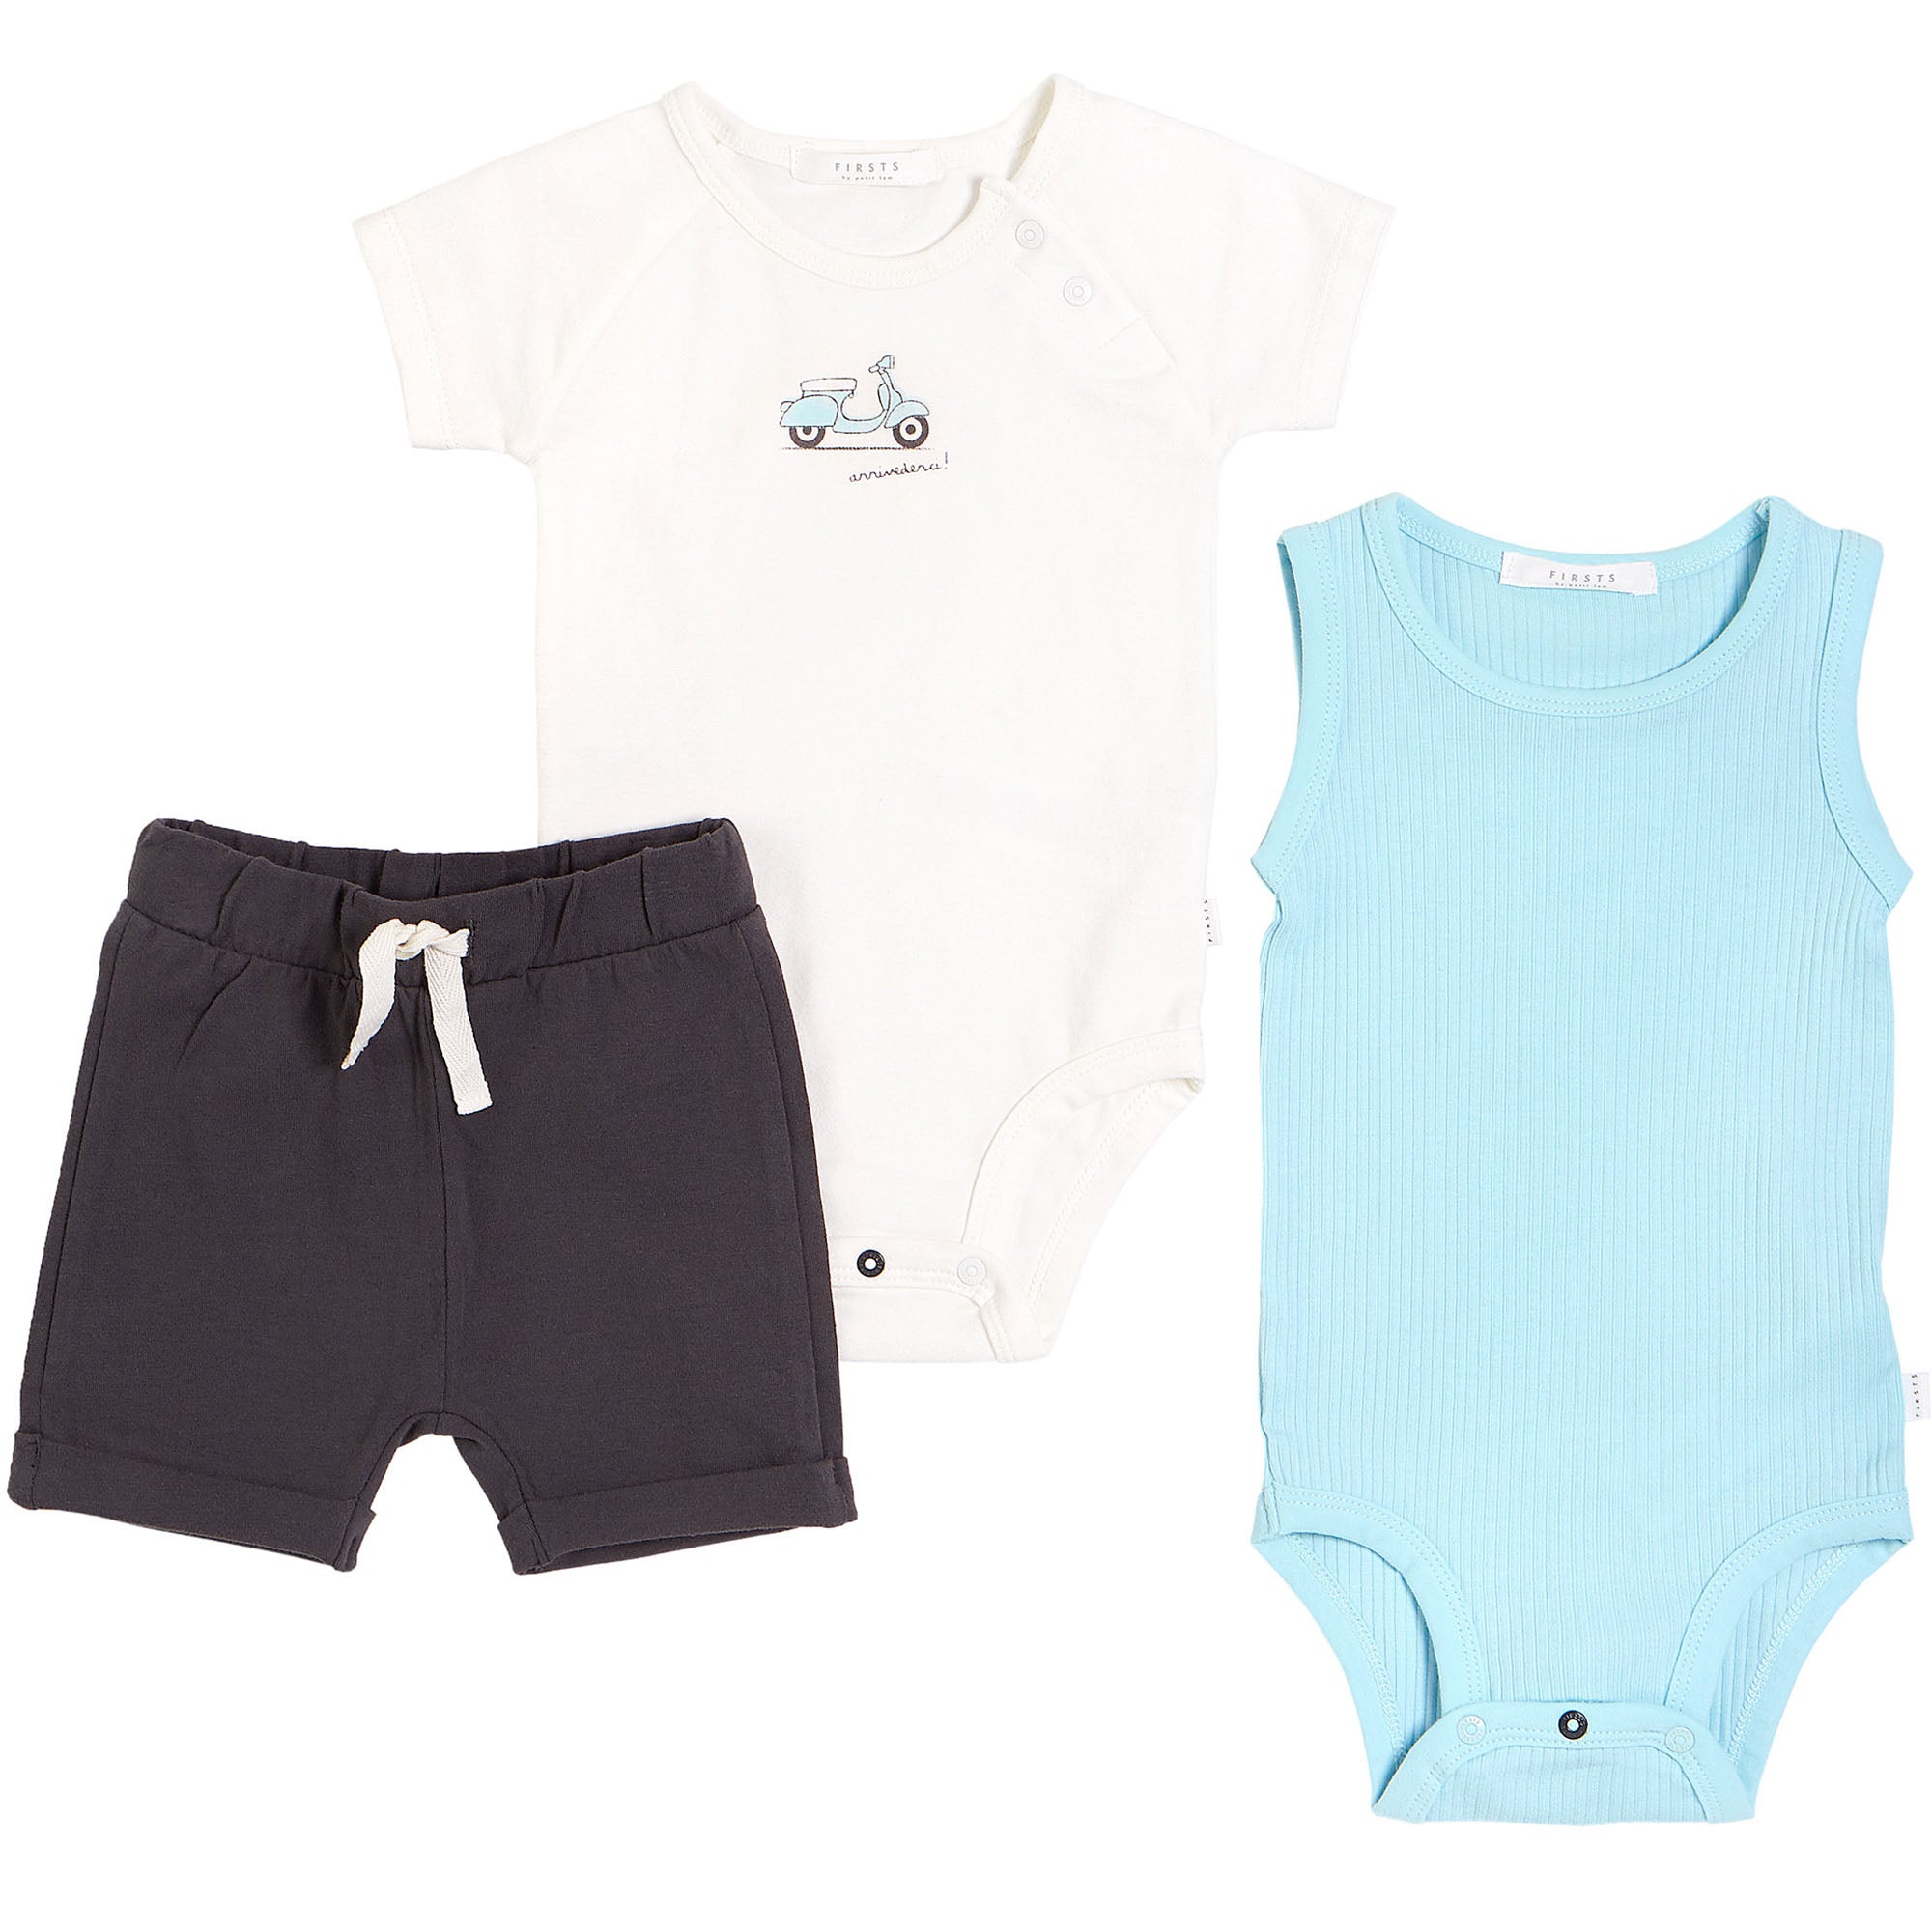 FIRSTS by Petit Lem Organic Baby Summer Outfit Set (3-Piece) - Motorino